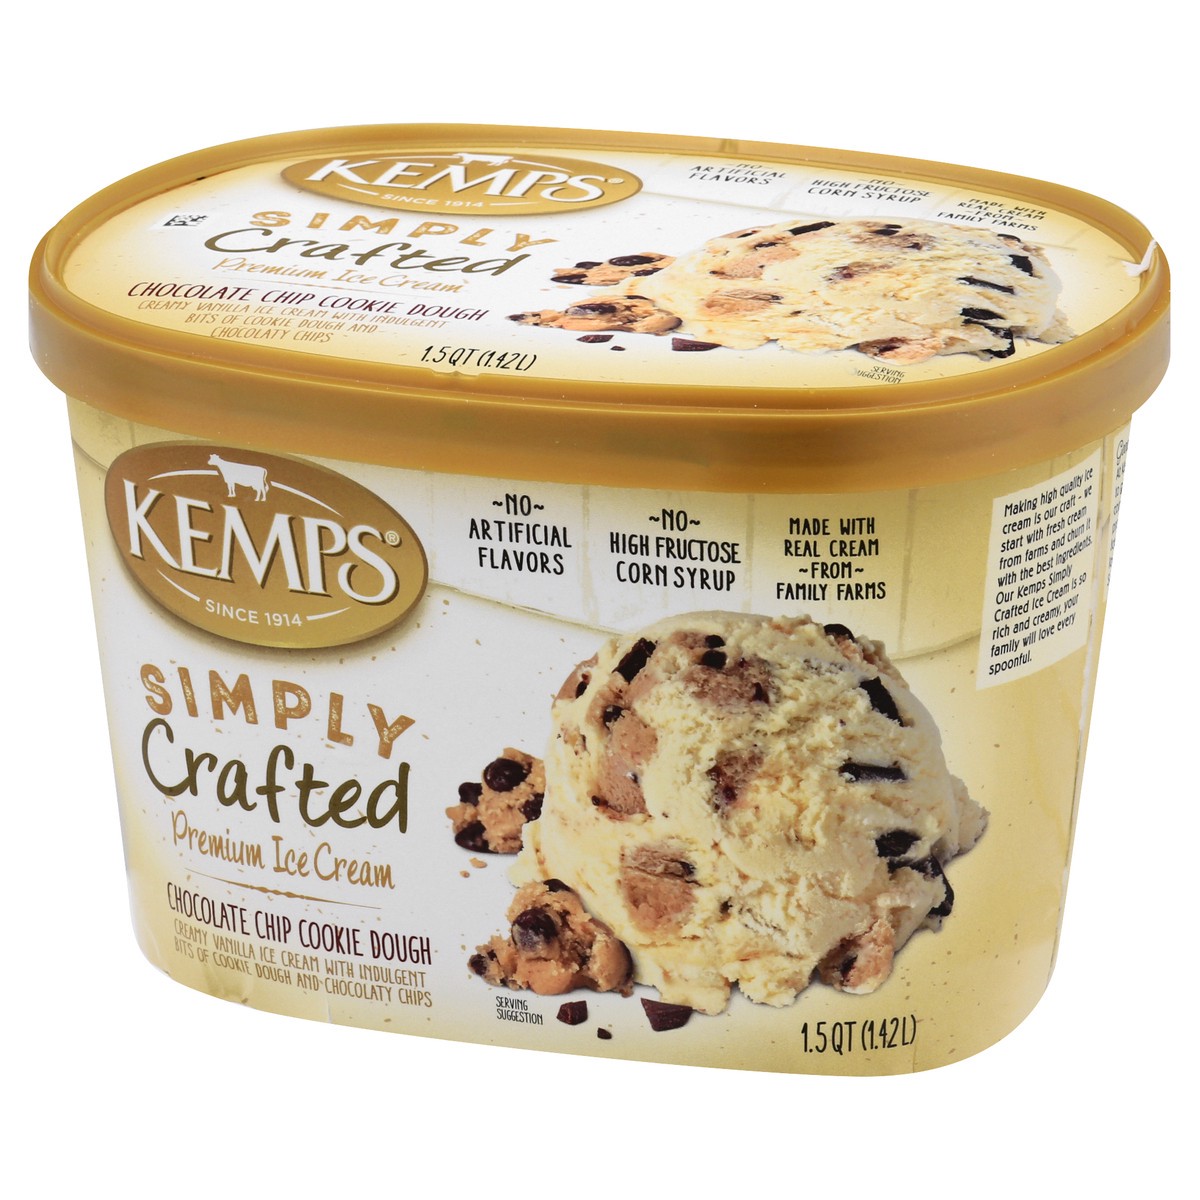 slide 3 of 9, Kemps Choc Chip Simply Crafted Ice Cream, 1.5 qt